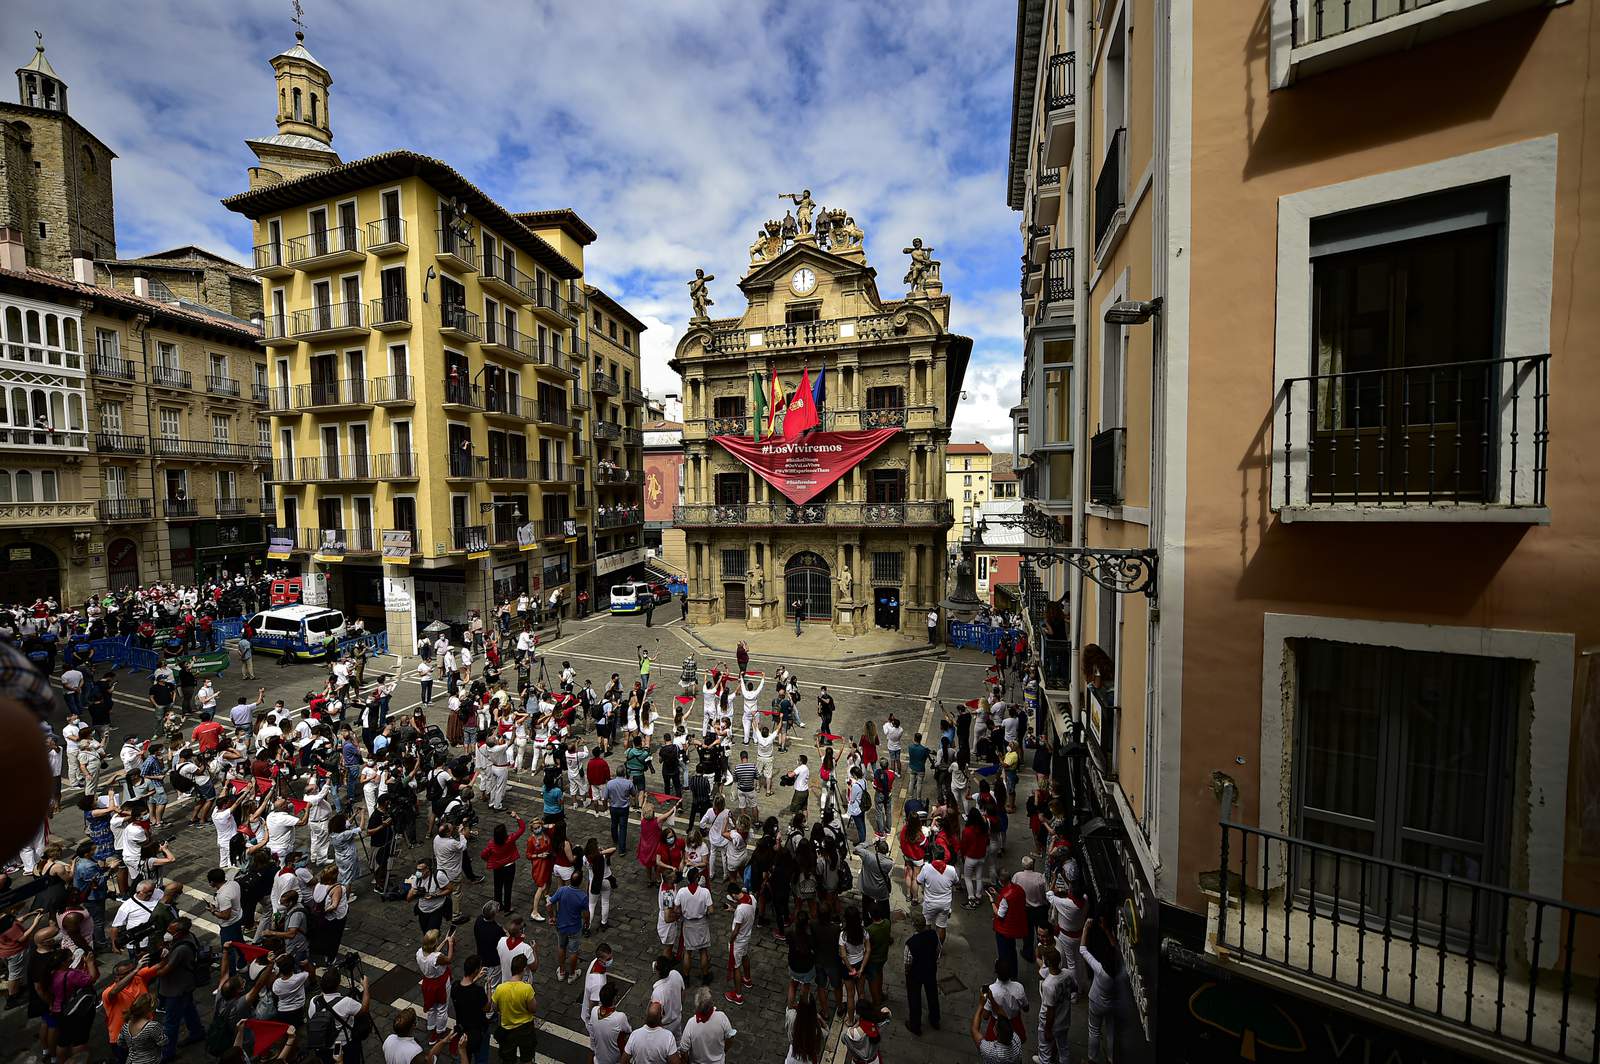 Little to celebrate in Pamplona with no running of the bulls